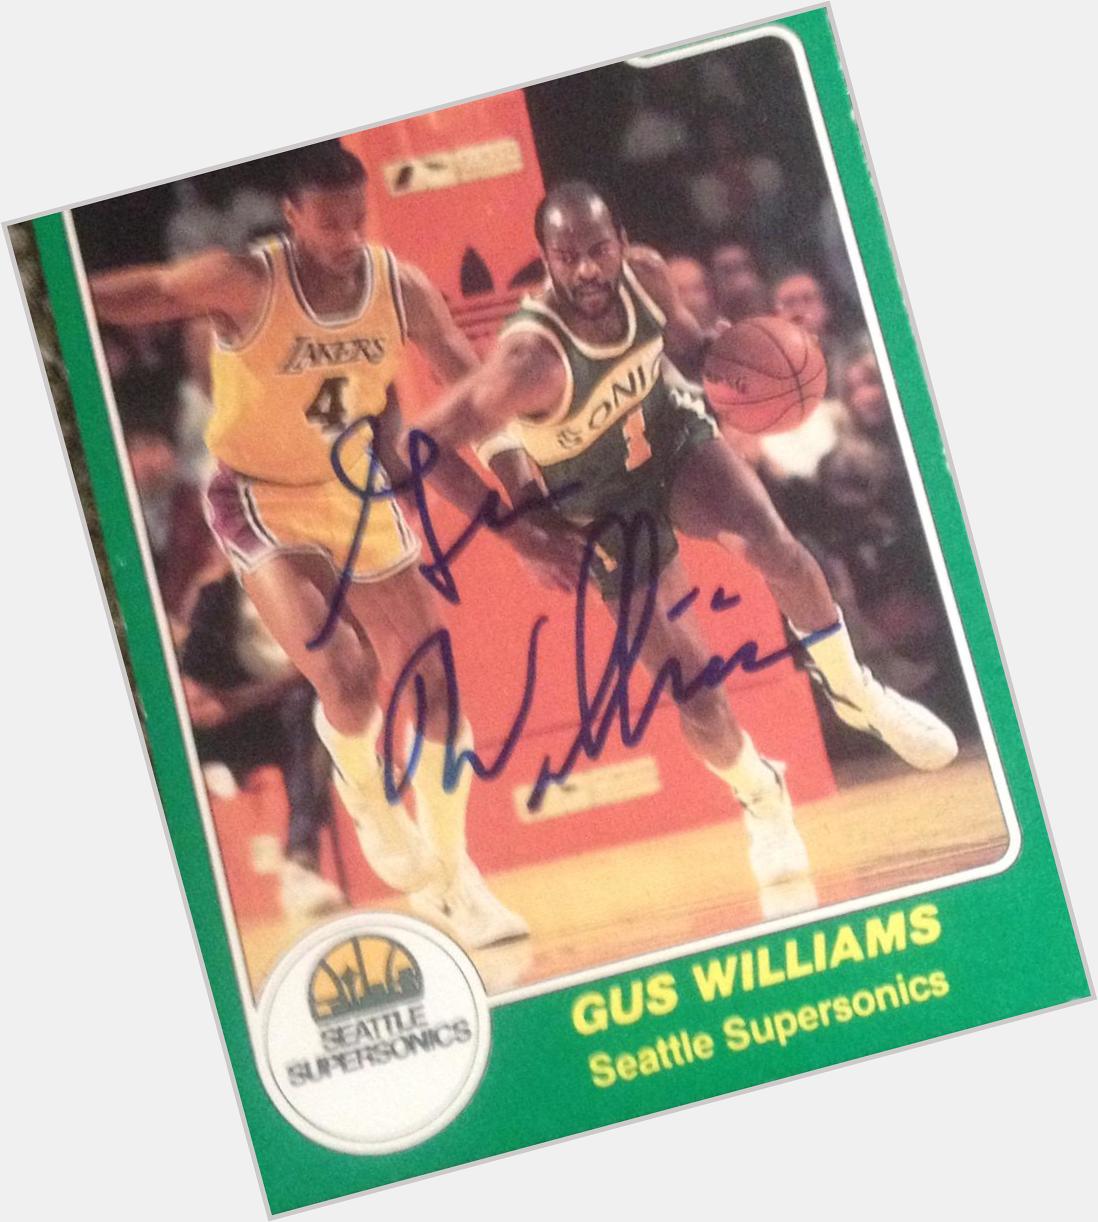   Happy Birthday to a very underrated player ,Gus Williams . 